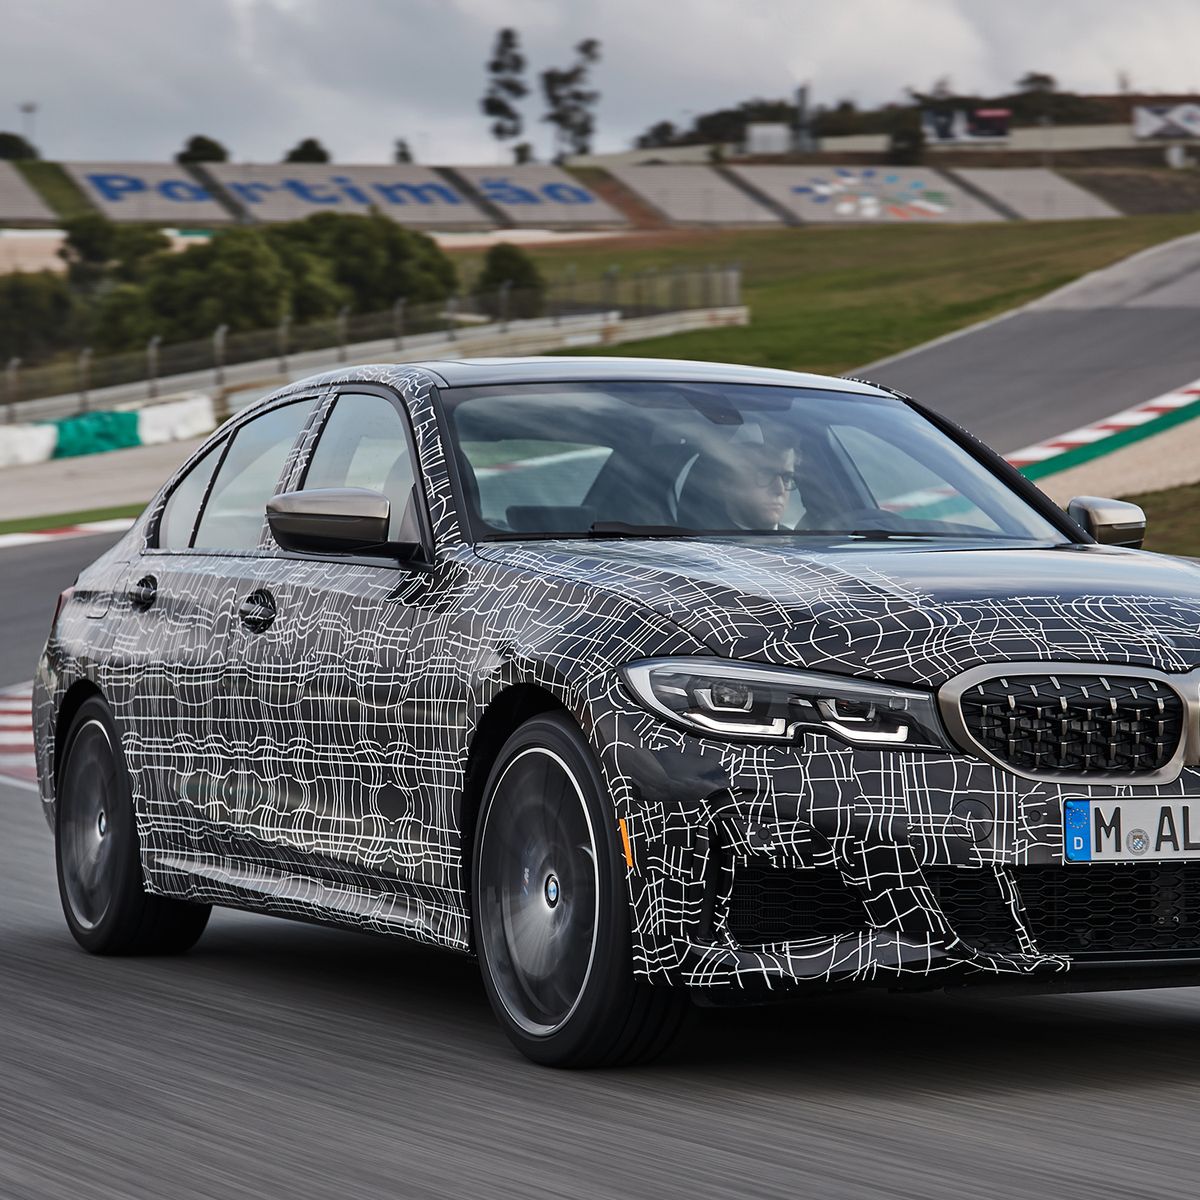 2020 BMW M340i xDrive Track Test - First Drive Review of New Six-Cylinder  3-Series